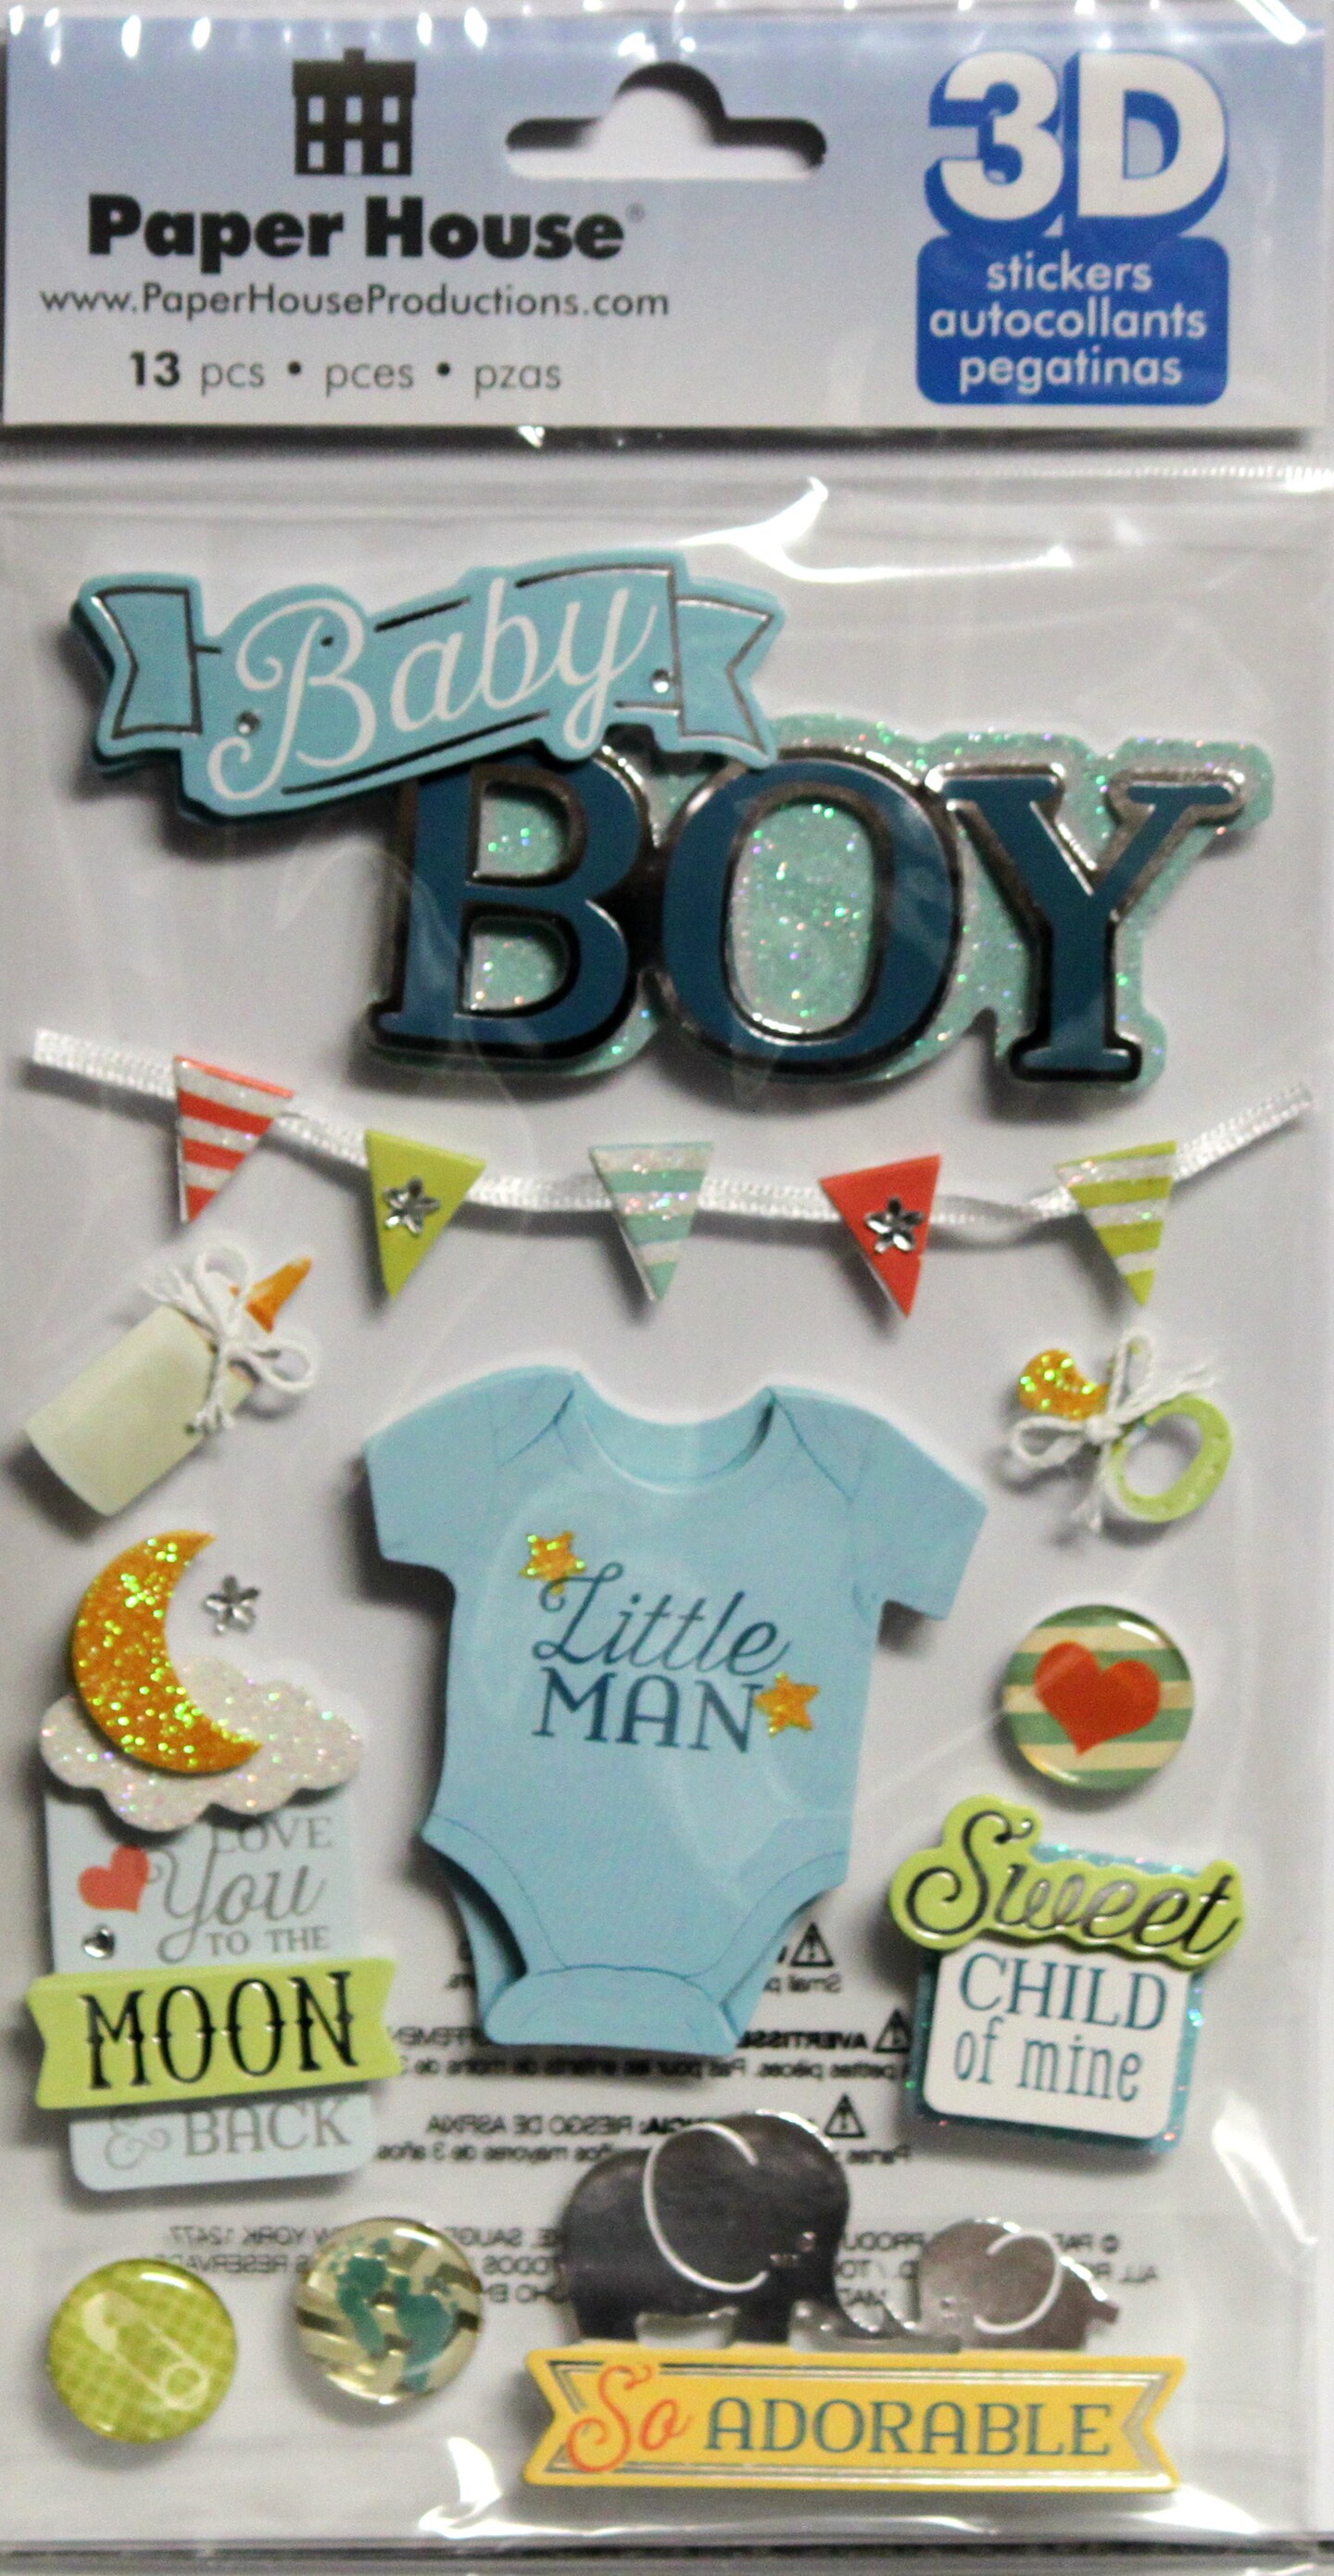 Paper House Baby Boy Dimensional 3D Stickers